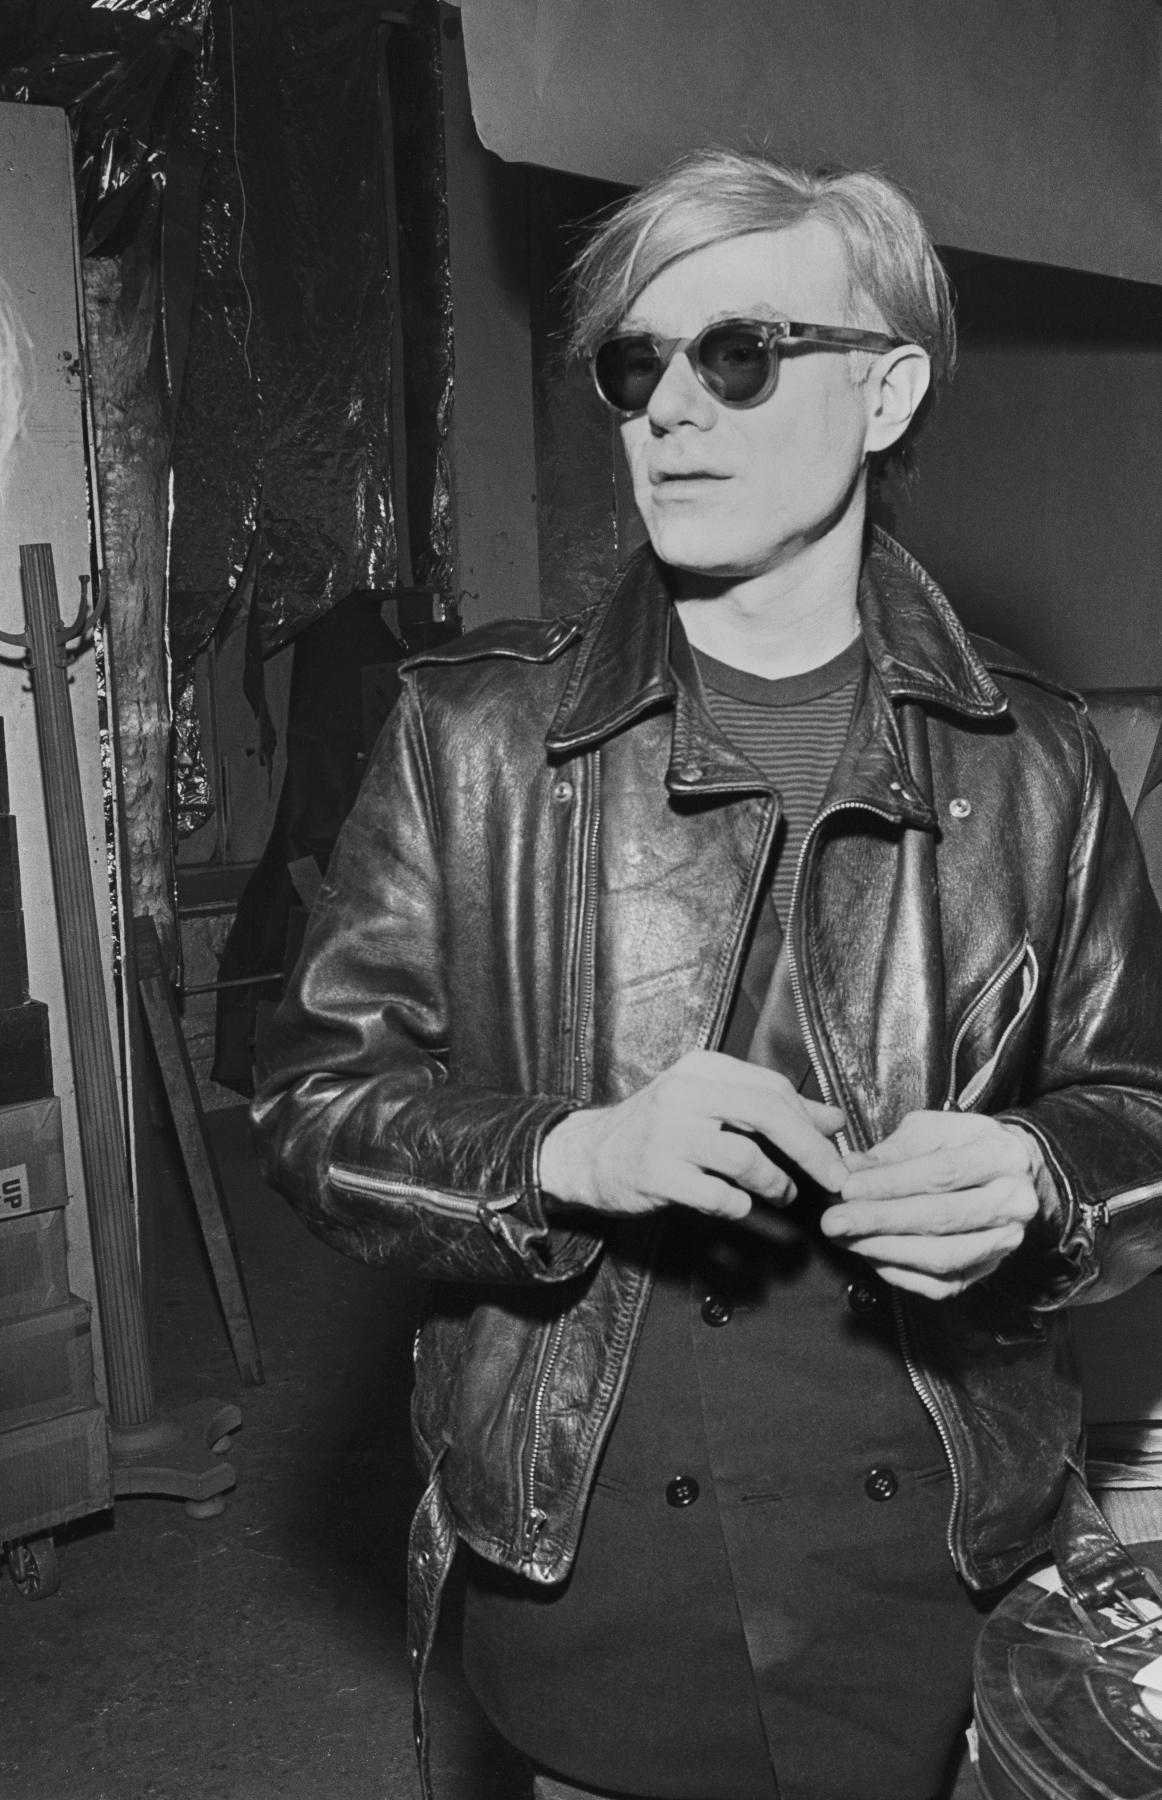 Andy Warhol Posing For A Photo by Santi Visalli